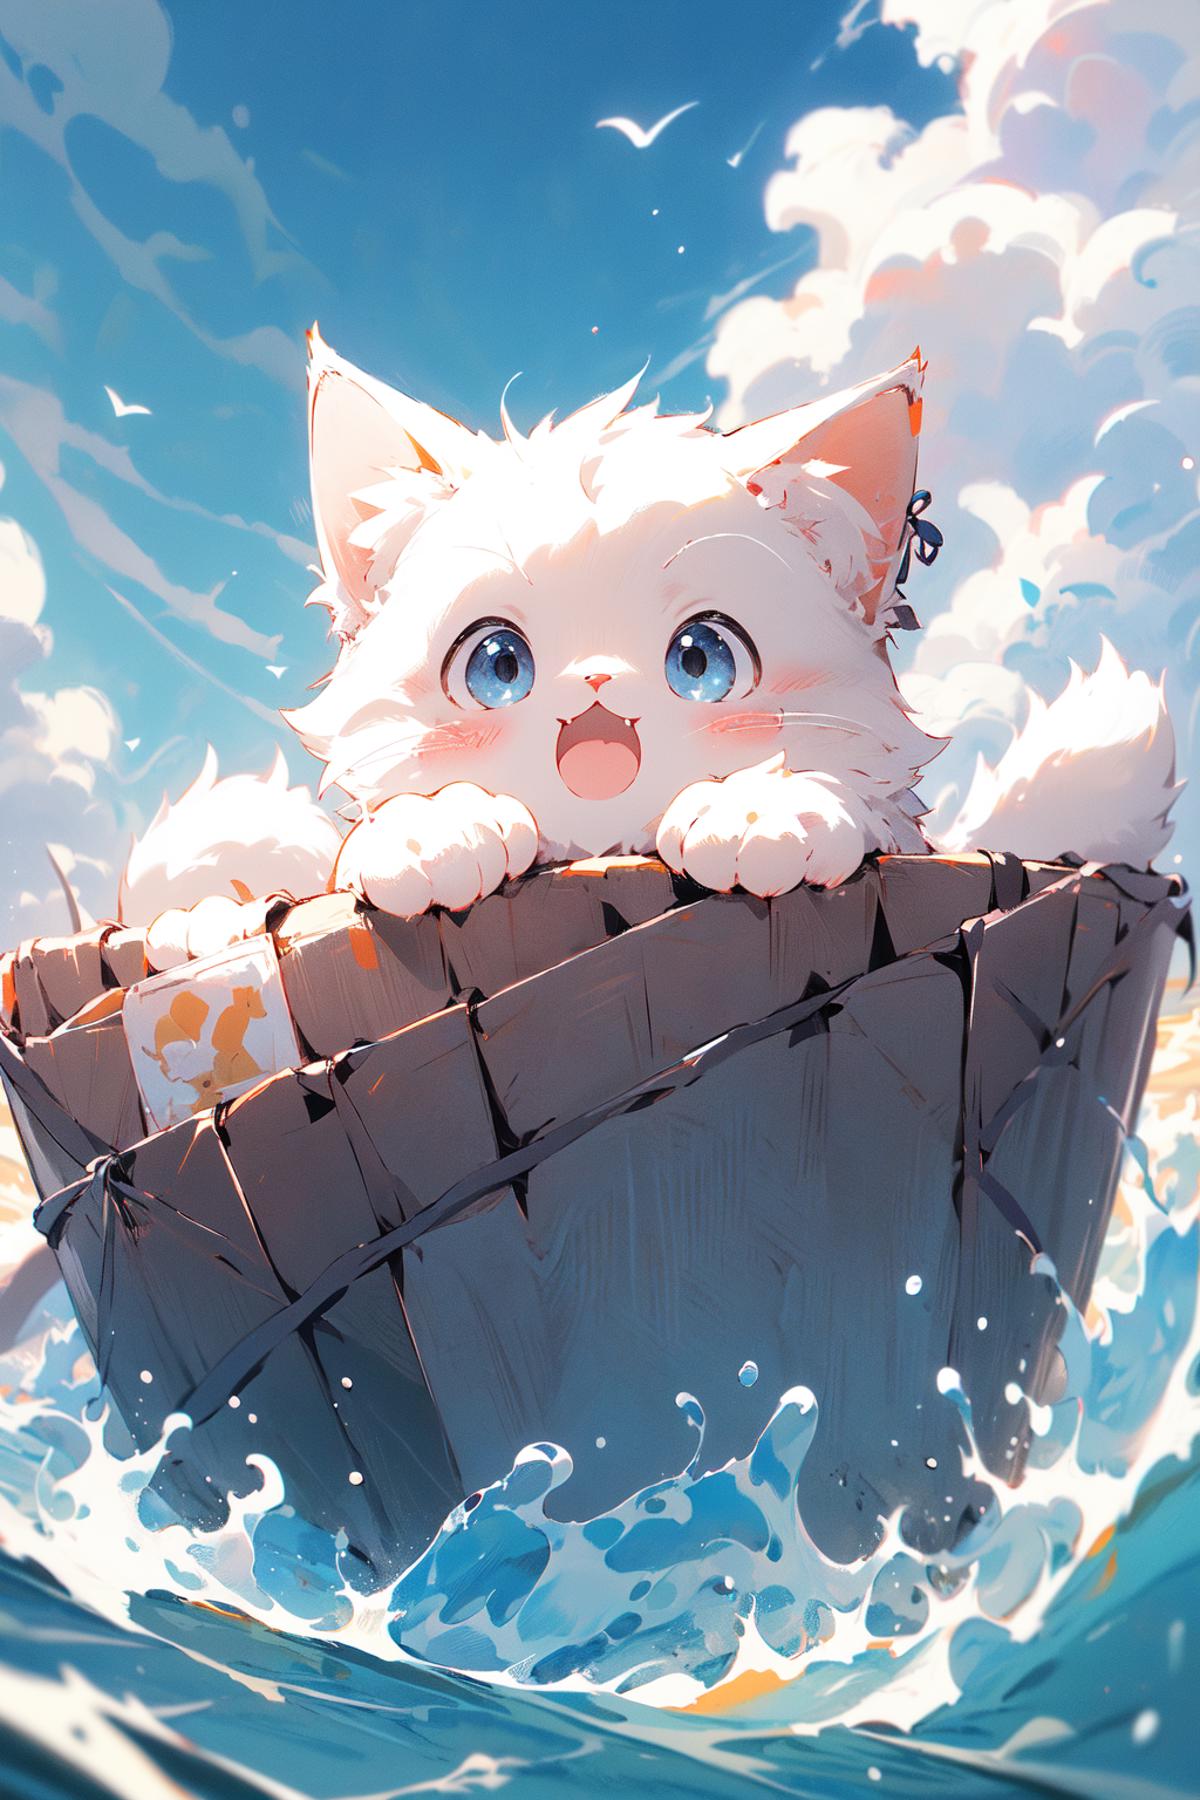 An adorable cartoon kitten sitting in a basket in the water.